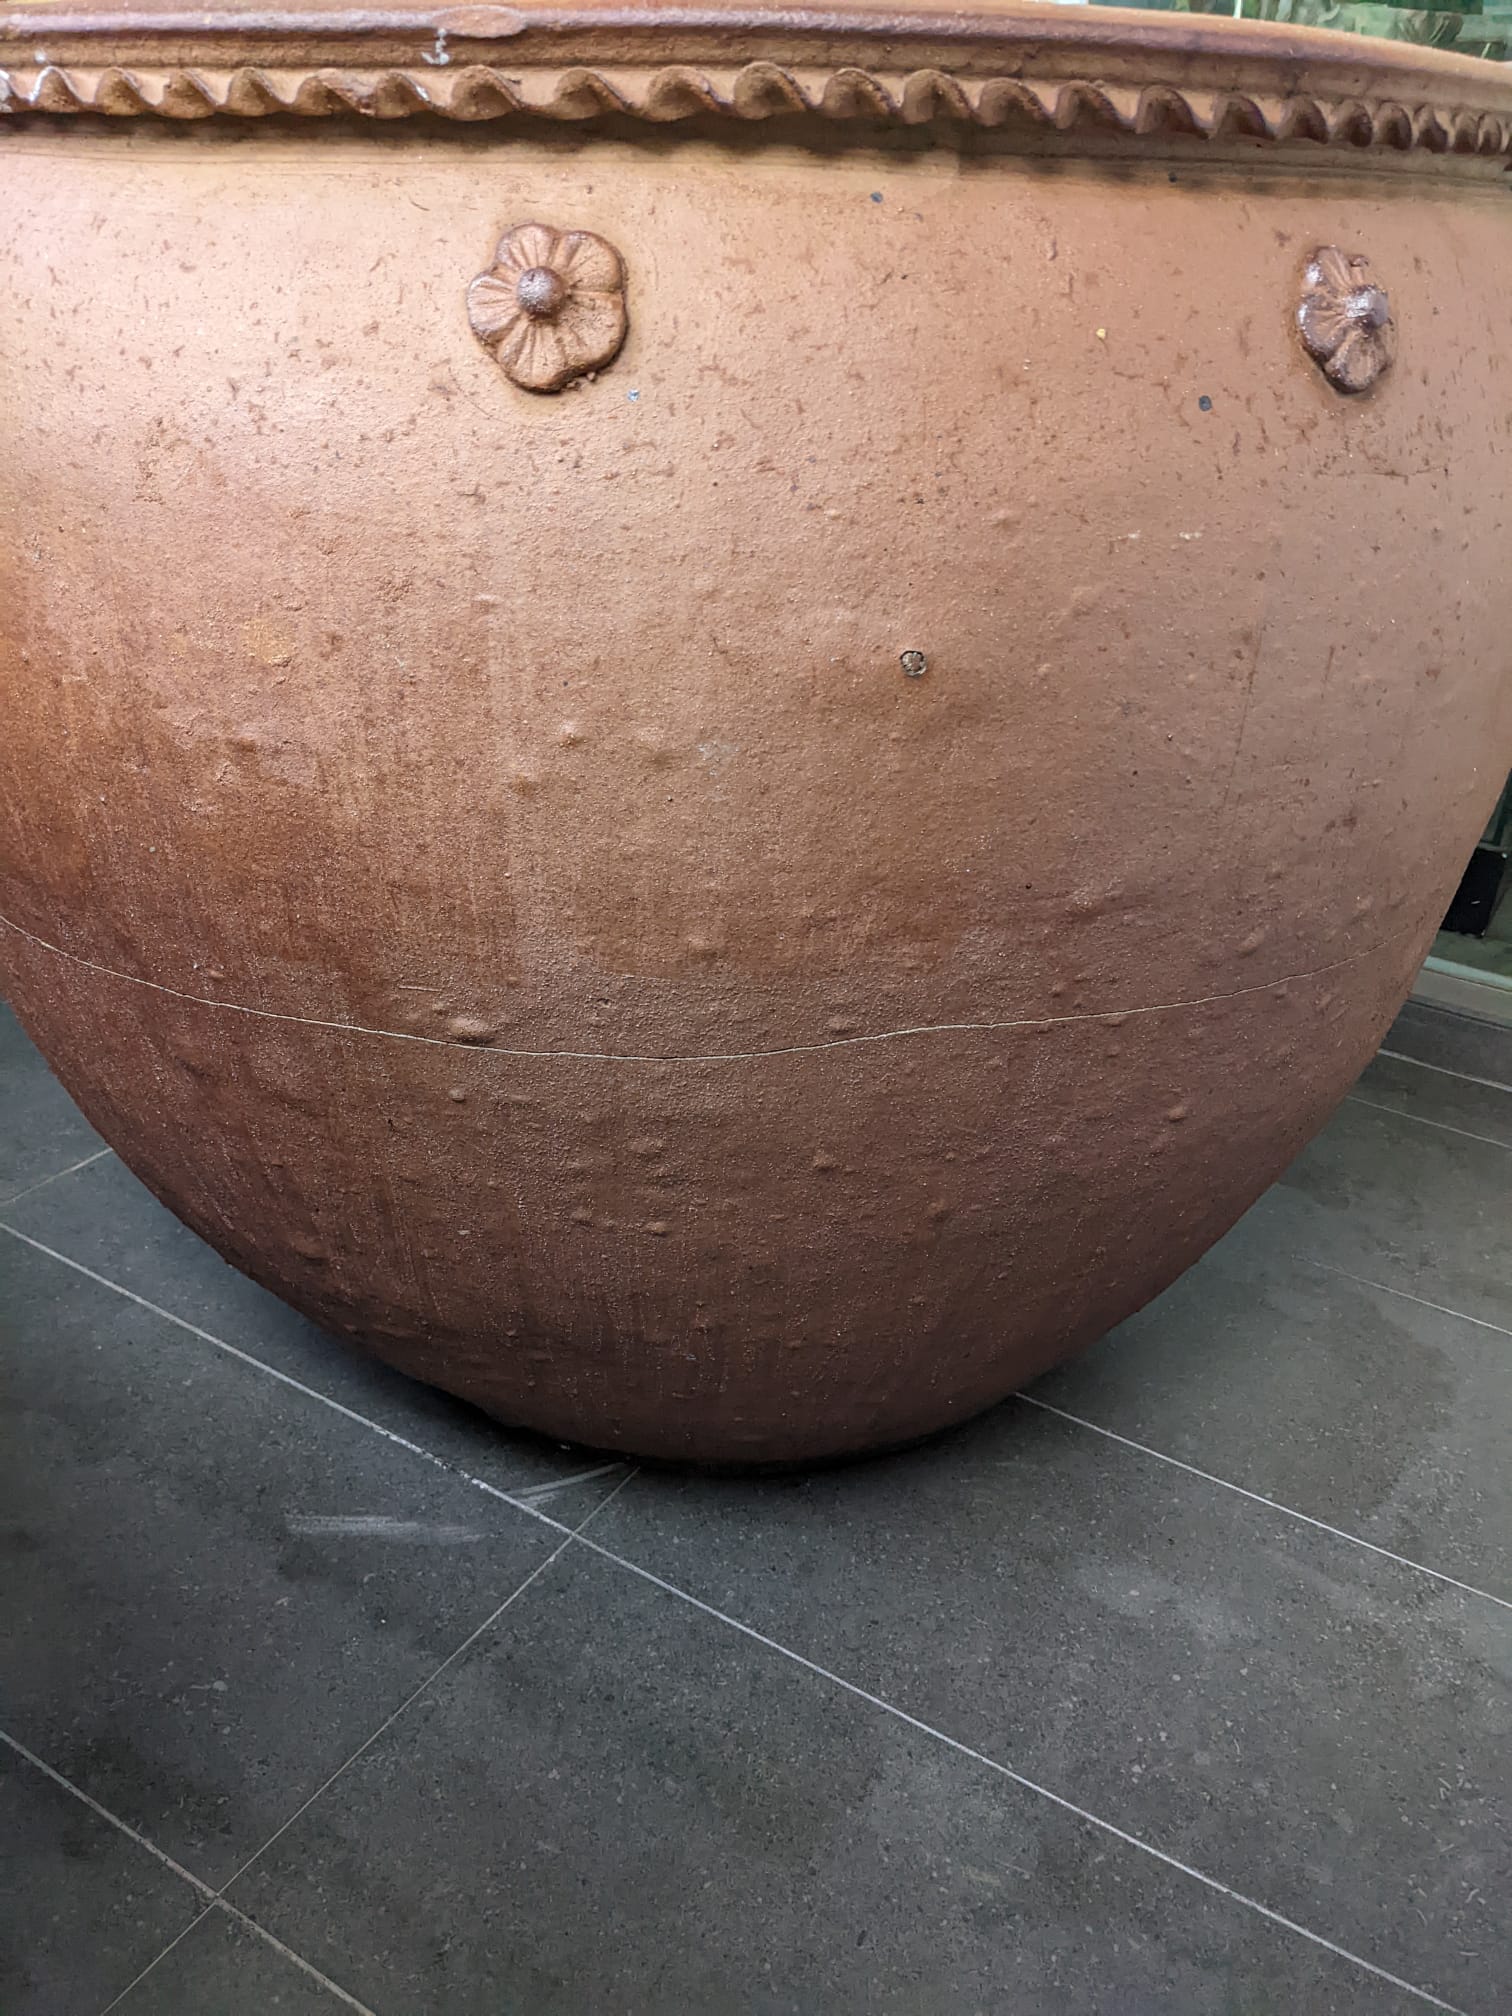 A PAIR OF LARGE TERRACOTTA POTS - Image 4 of 6